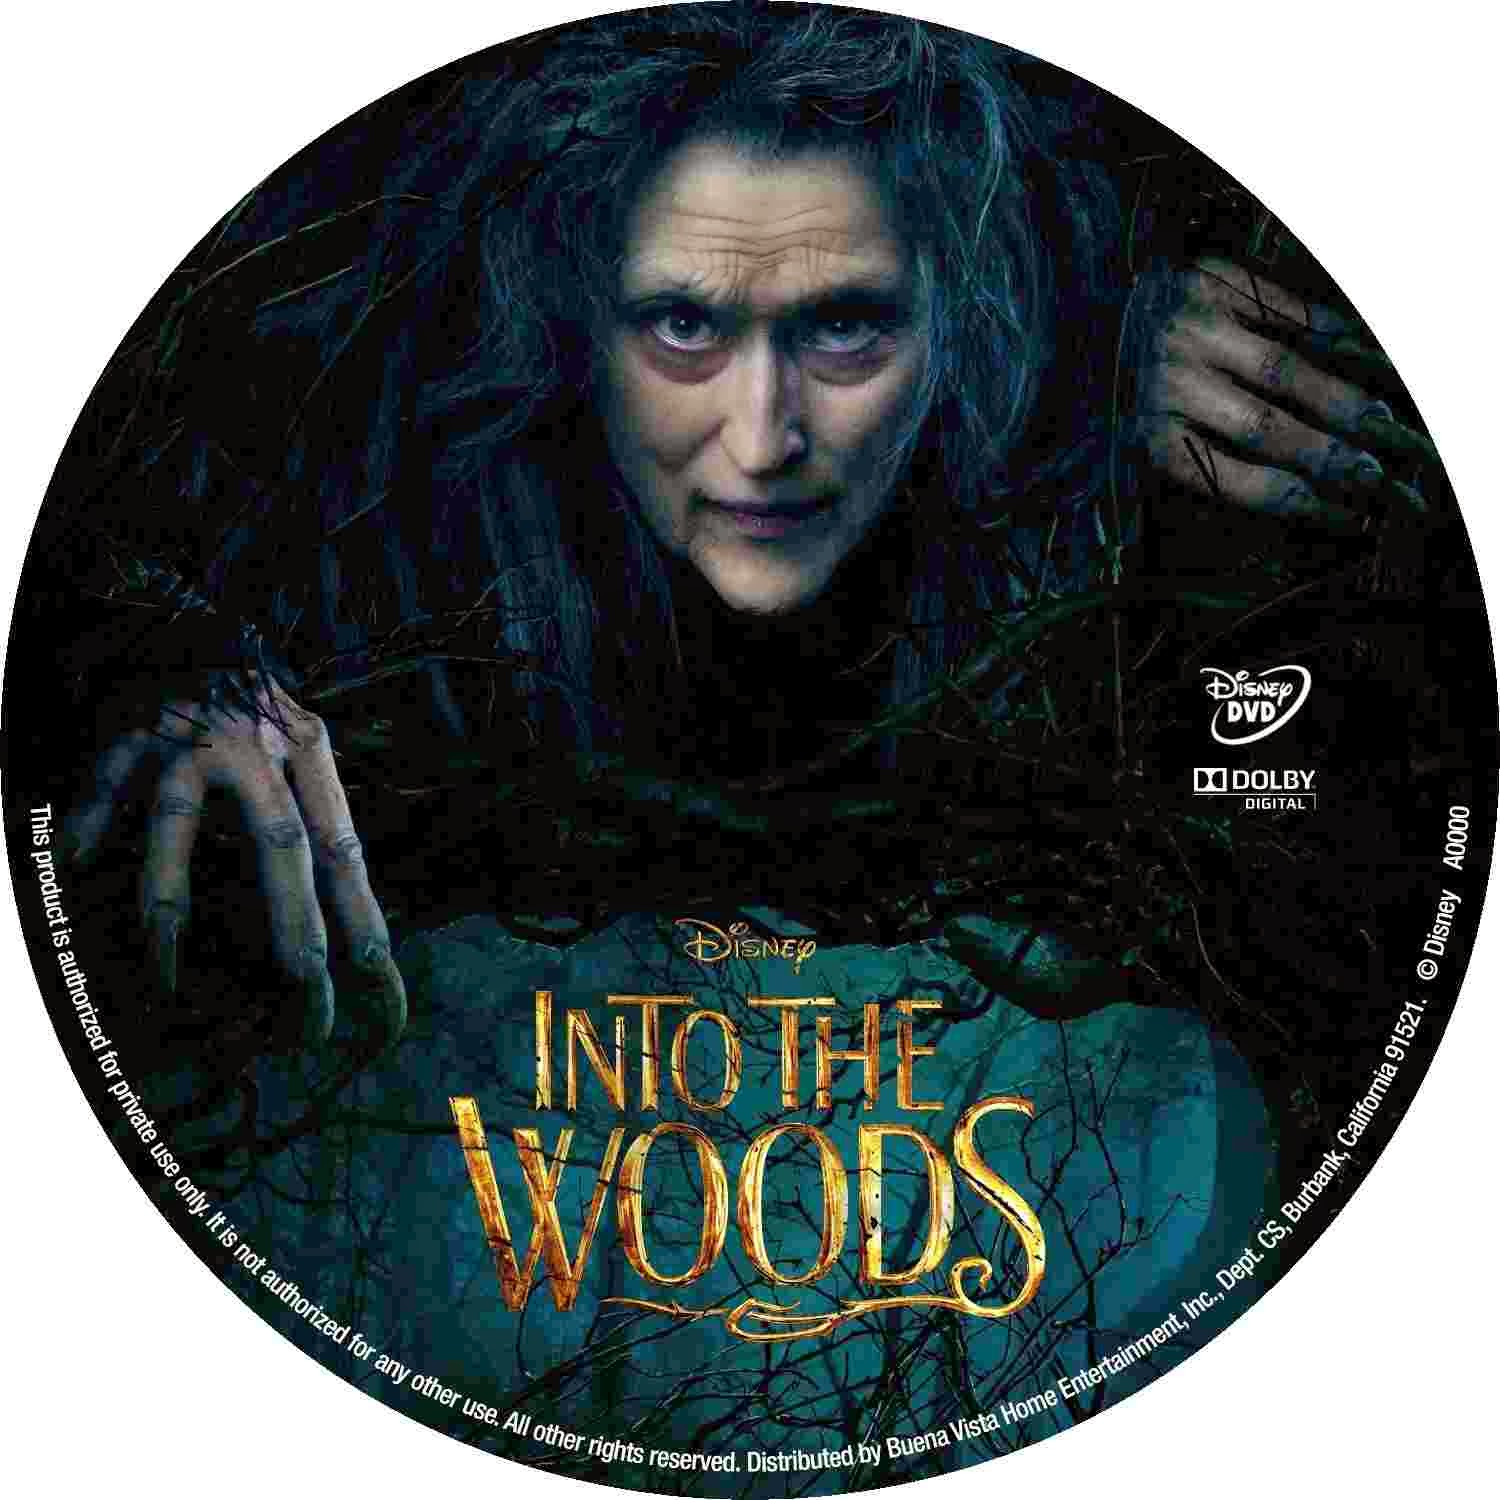 Into the Woods (2014) - Label / CD Cover Movie